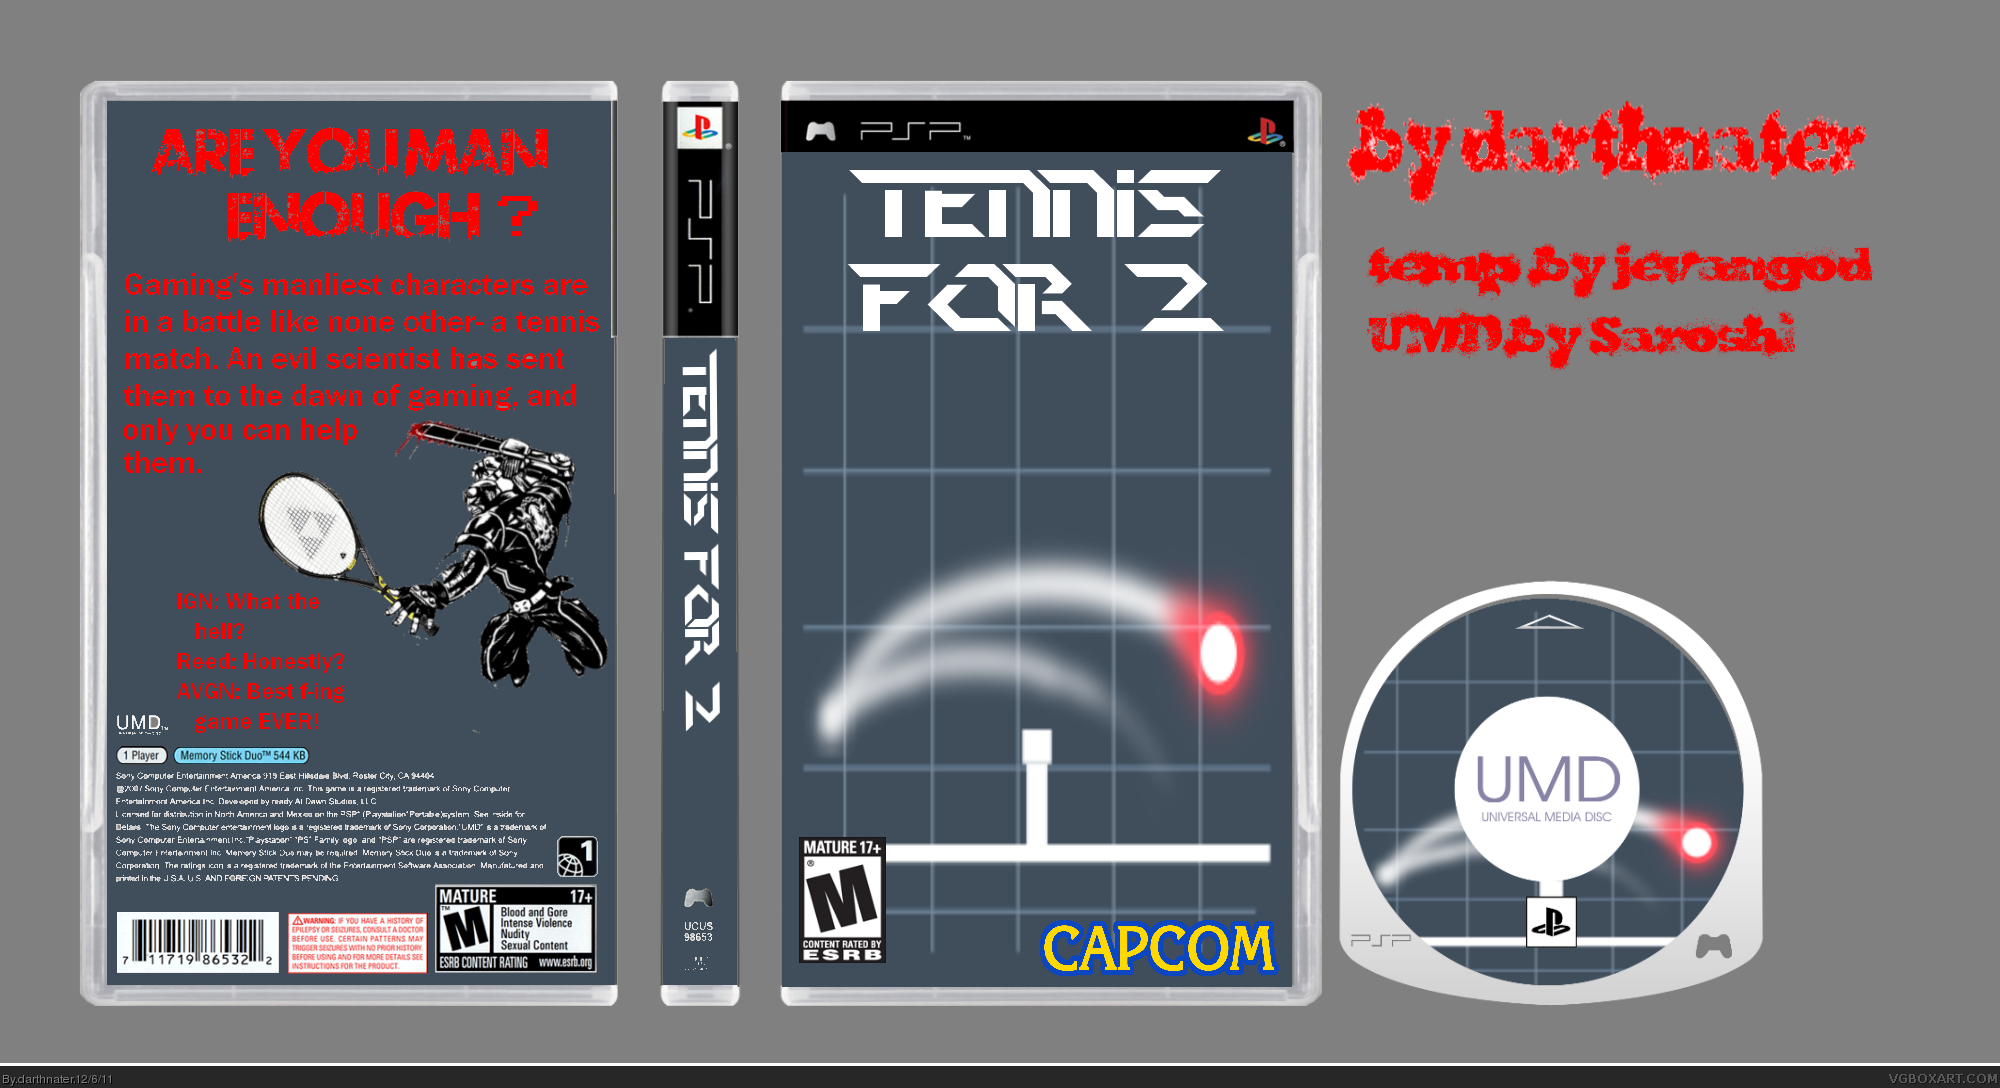 Tennis For Two box cover